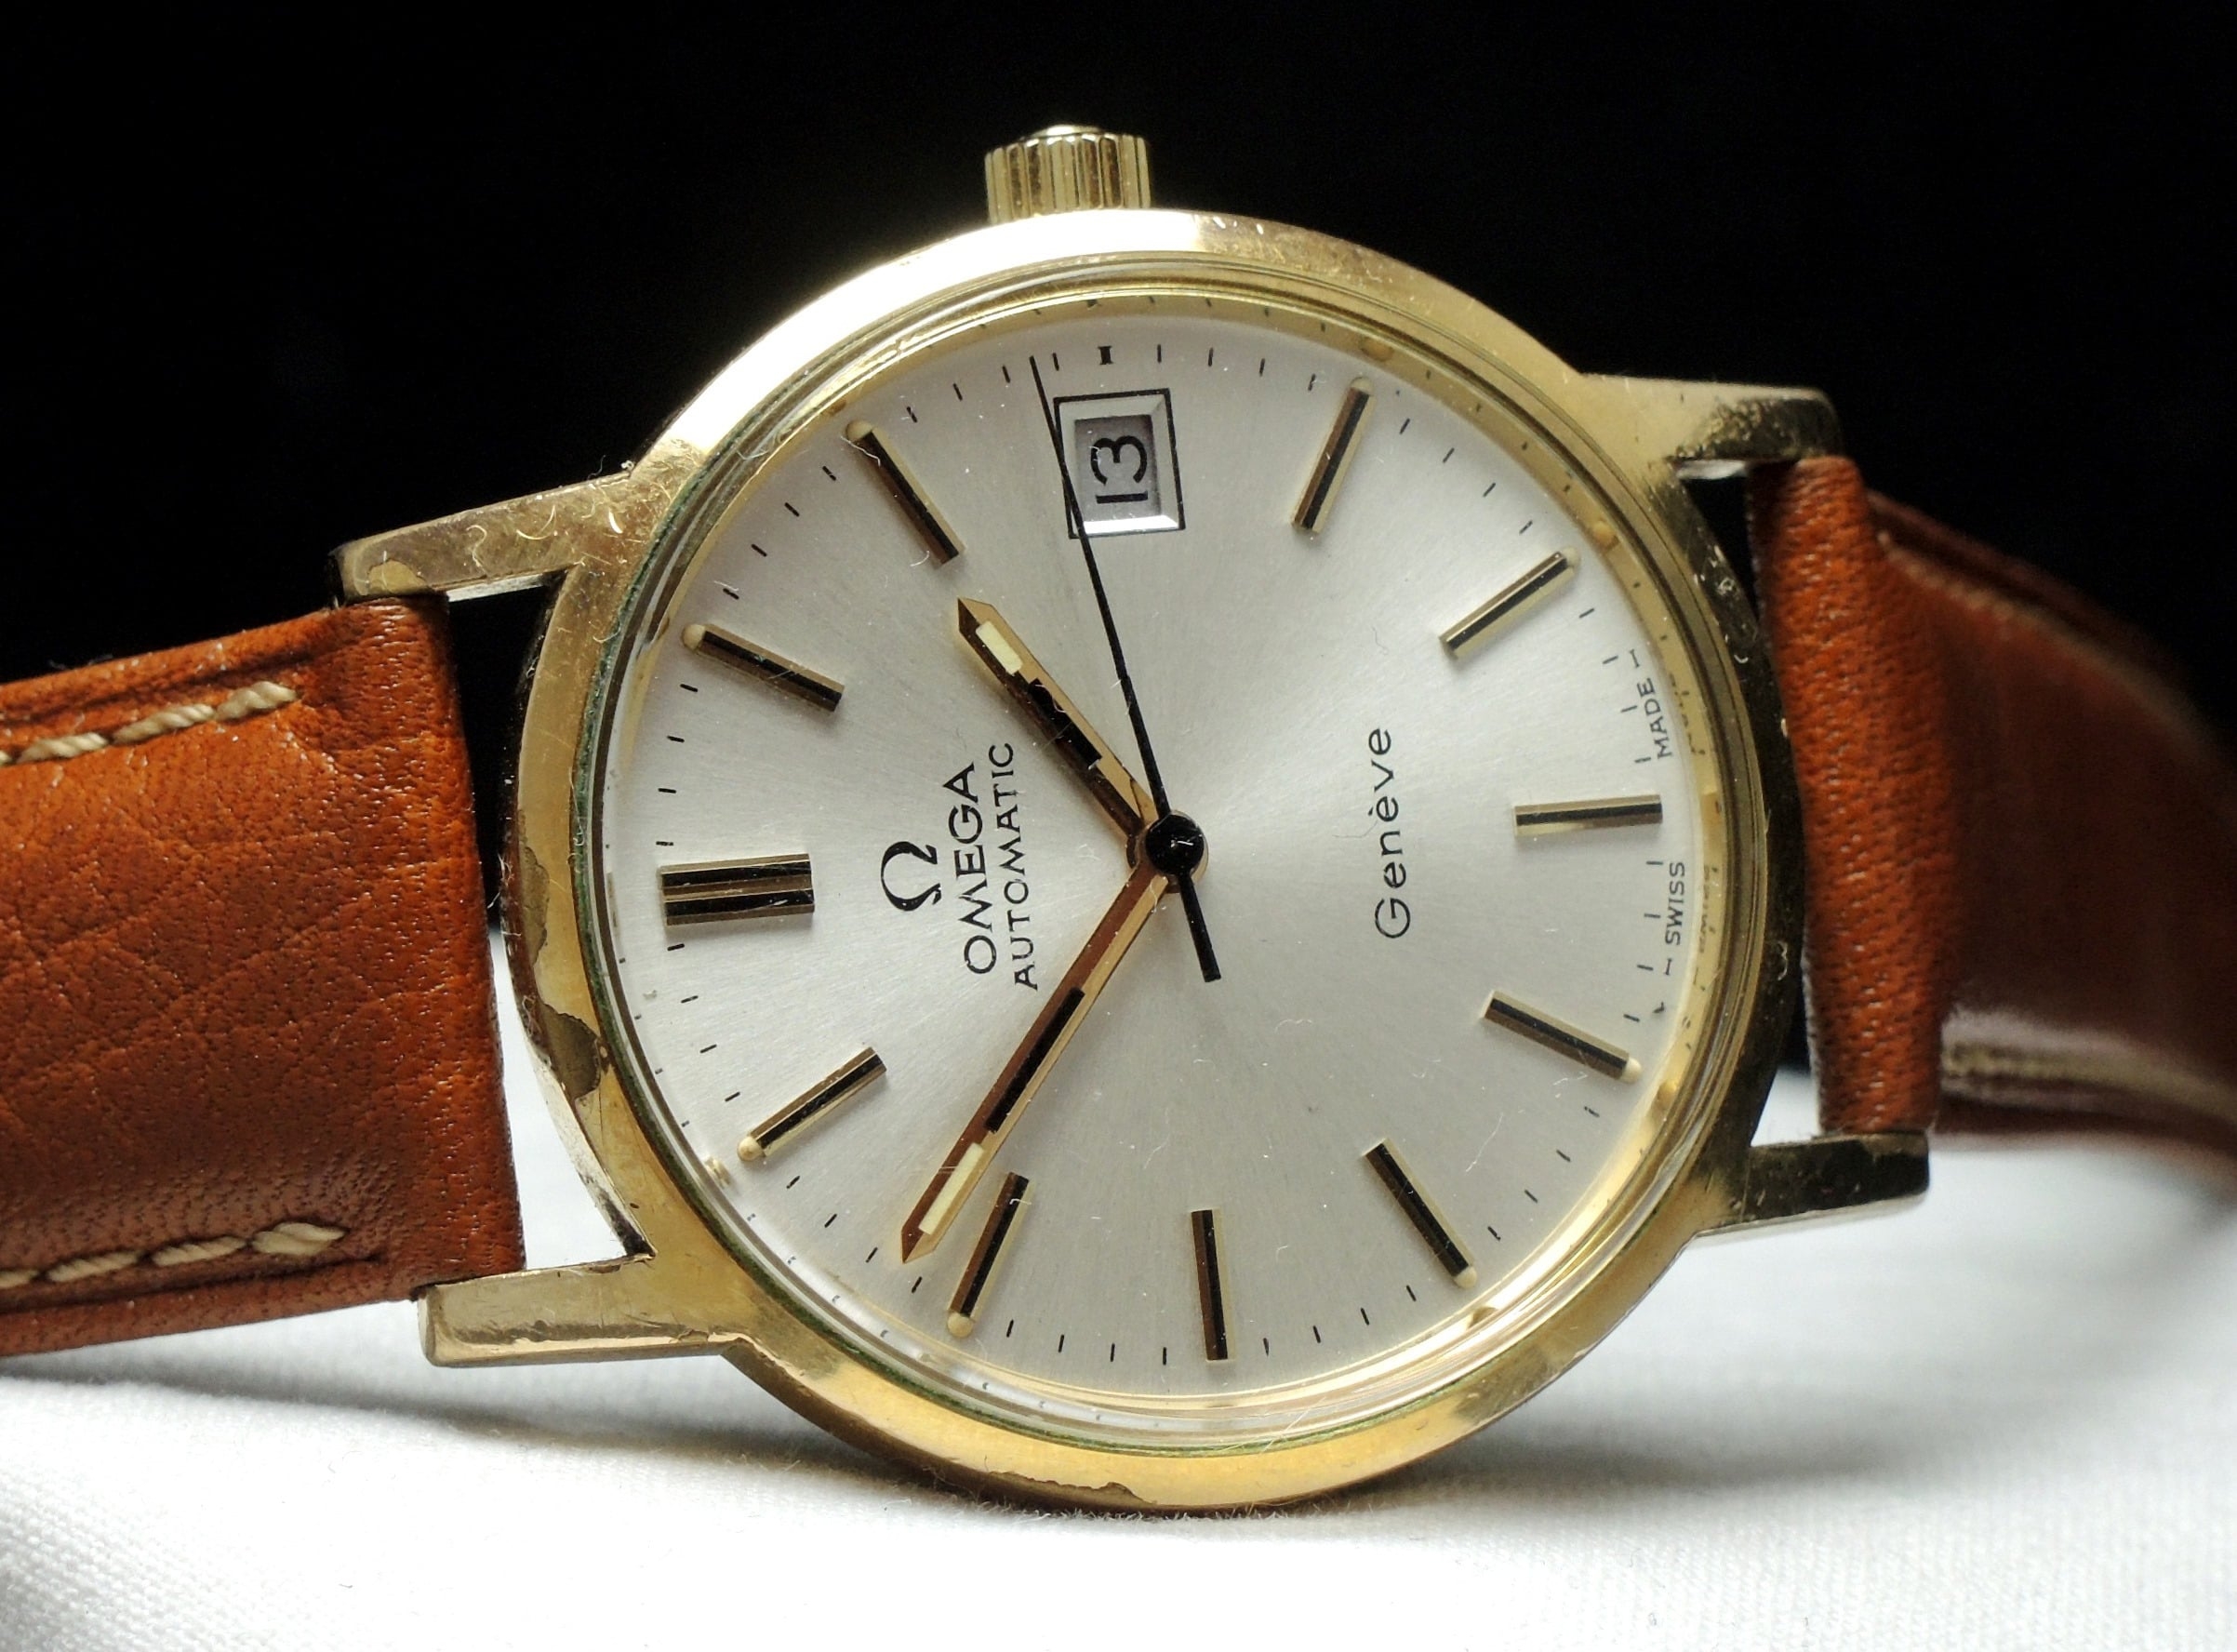 Currently in Service: Omega Geneve Automatik Automatic Date | Vintage